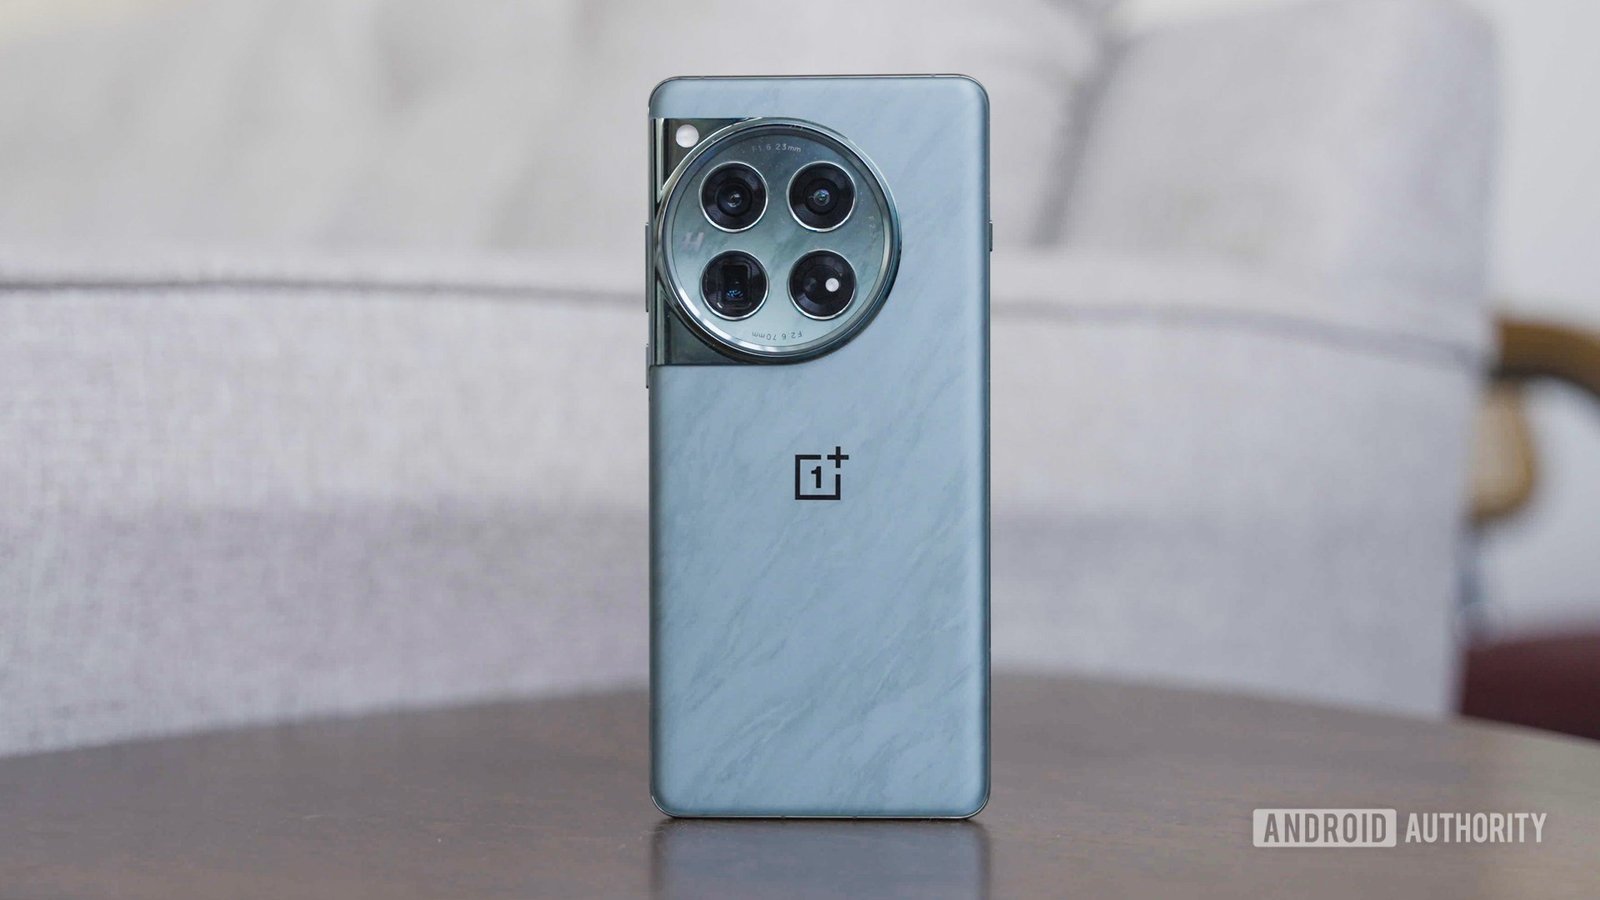 OnePlus could soon let users cap battery level at 80% to slow aging (APK teardown)